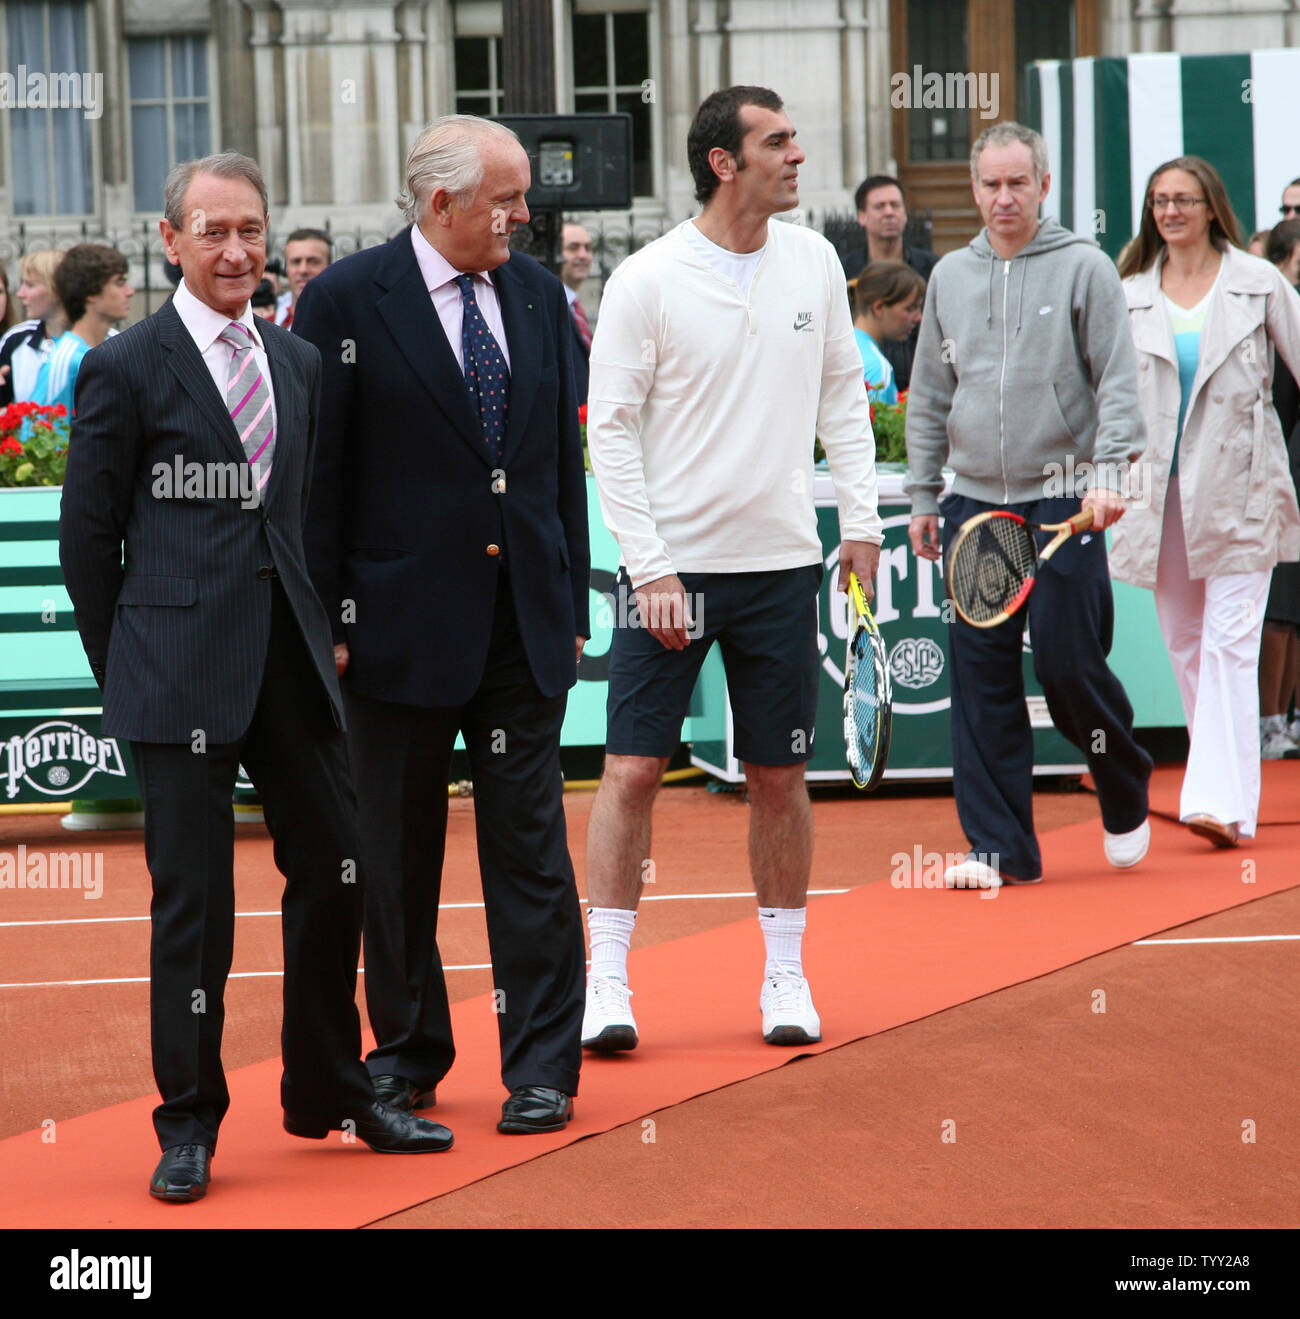 (From L to R) Mayor of Paris Bertrand Delanoe, President of the French Tennis Federation Christian Bimes, tennis greats Cedric Pioline, John McEnroe and Mary Pierce arrive on a clay court set up in front of the Hotel de Ville (city hall) during the launch of the exhibition 'Roland Garros in the City' in Paris on June 4, 2008.  The event coincides with the French Open tennis tournament taking place this week in Paris.   (UPI Photo/ David Silpa) Stock Photo